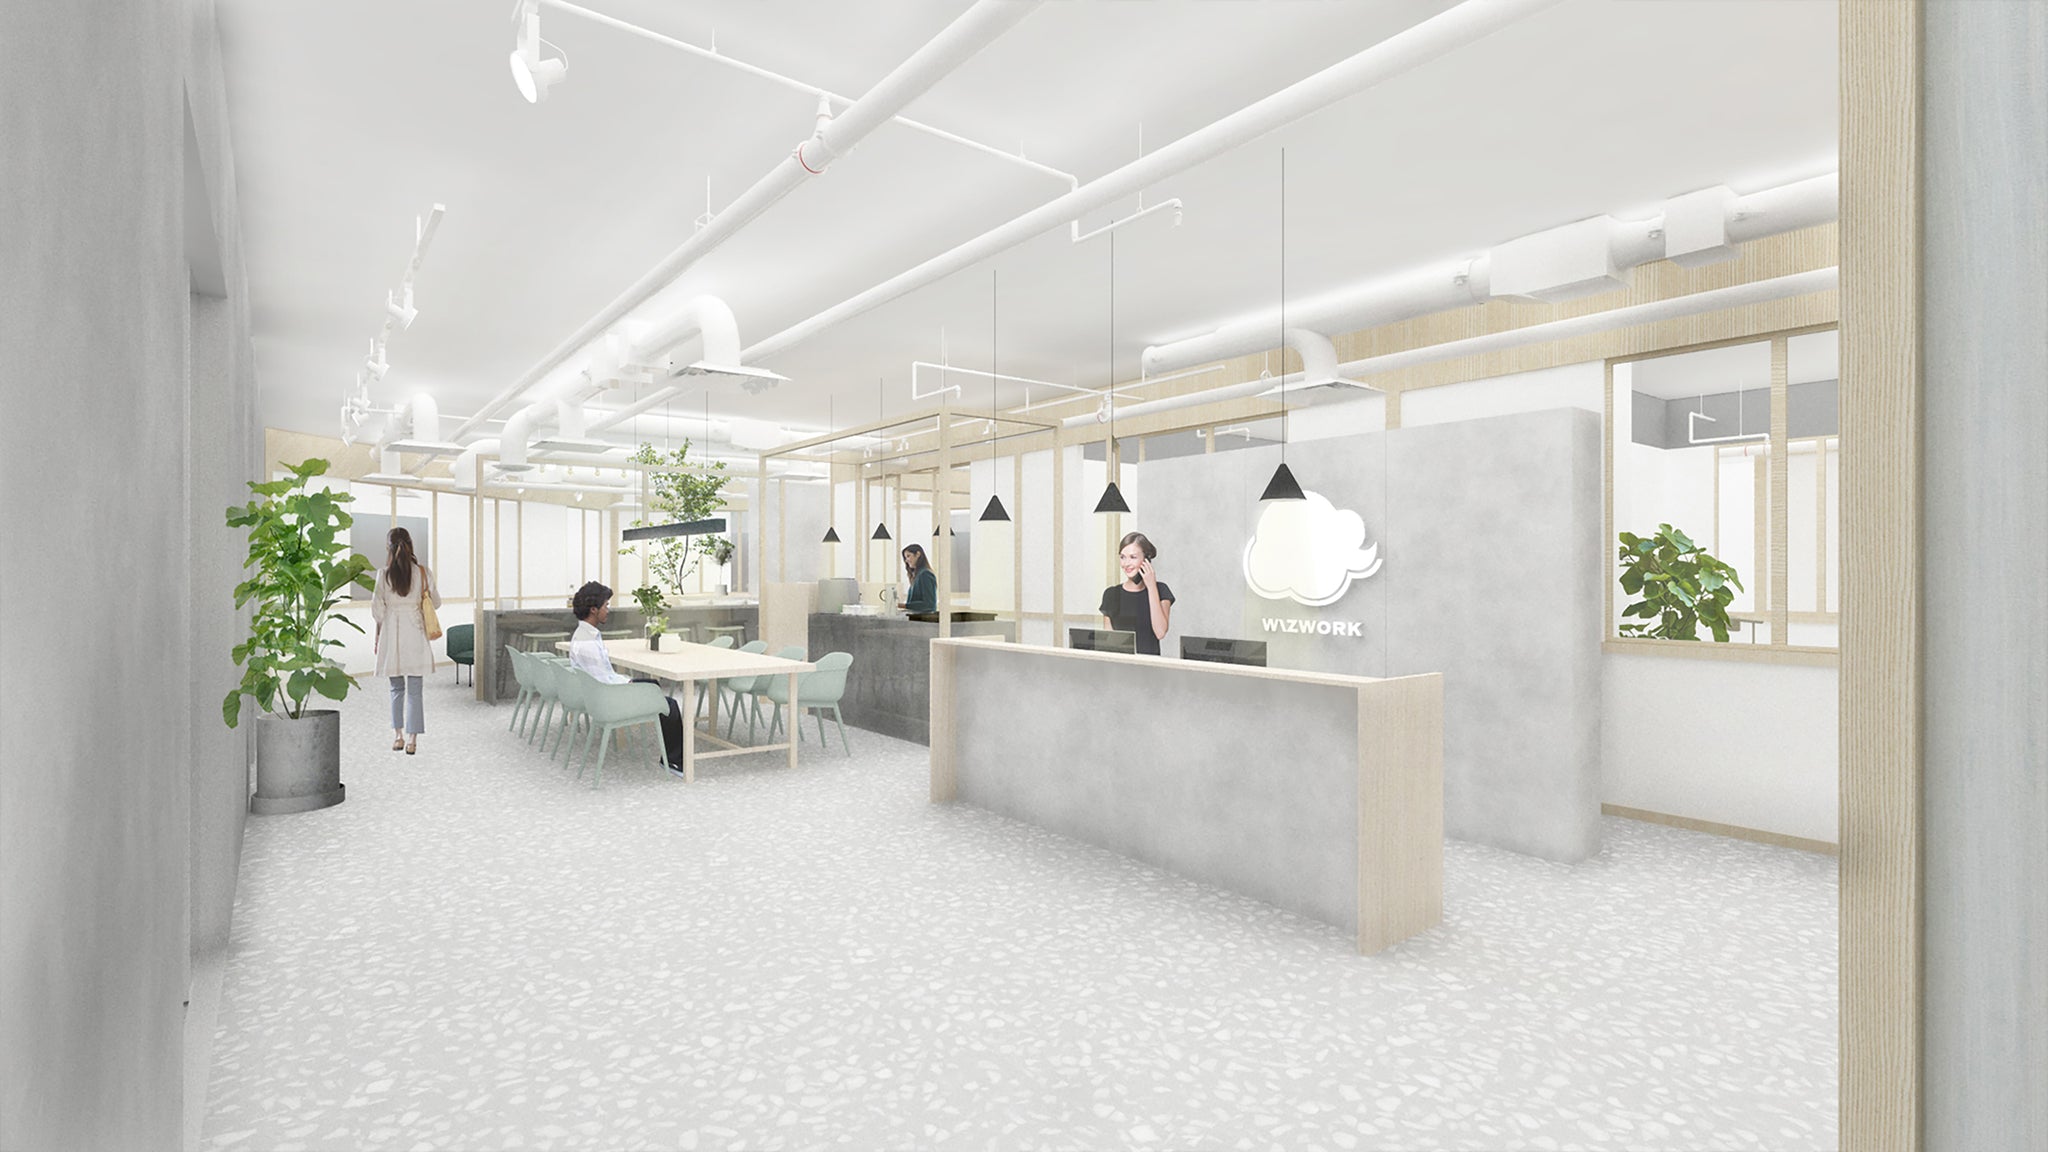 Wizwork Co-working Space 维尚联合办公